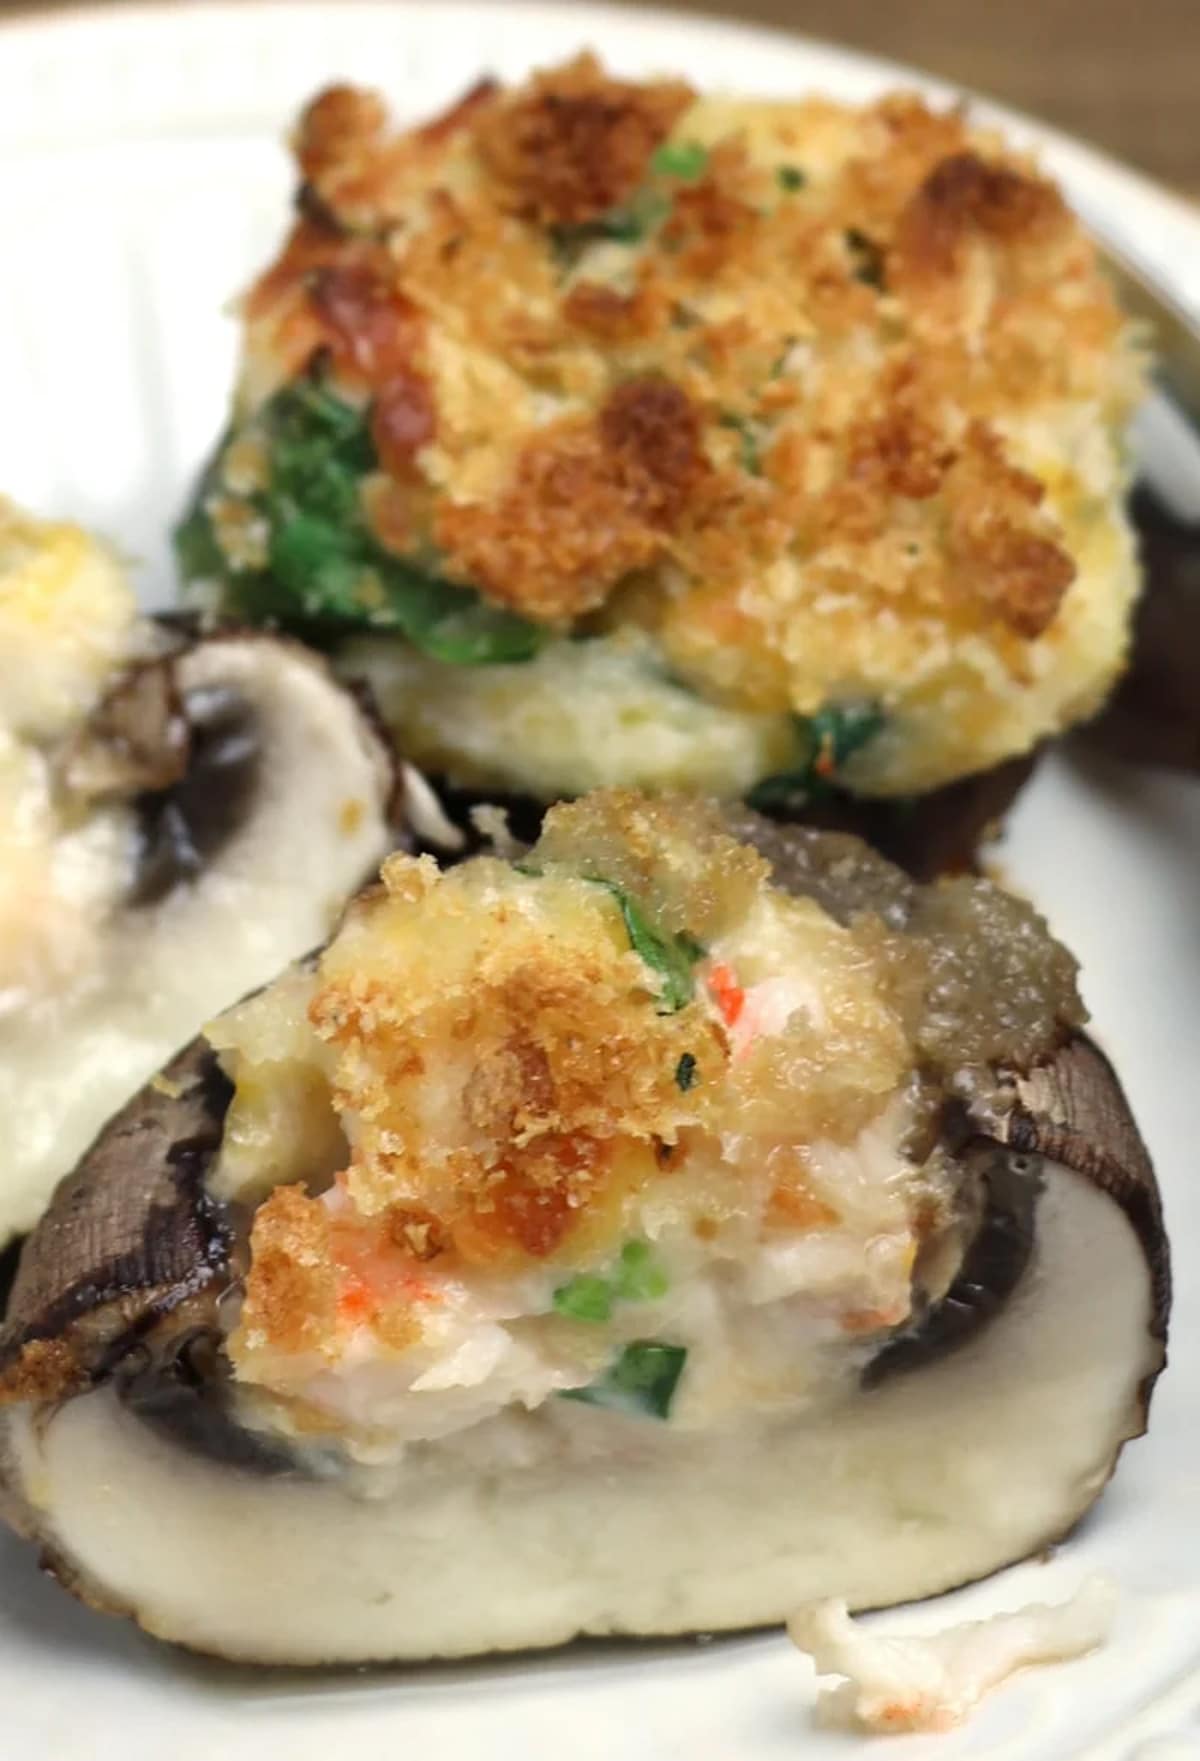 Sliced stuffed mushroom with shrimp and topped with breadcrumbs.